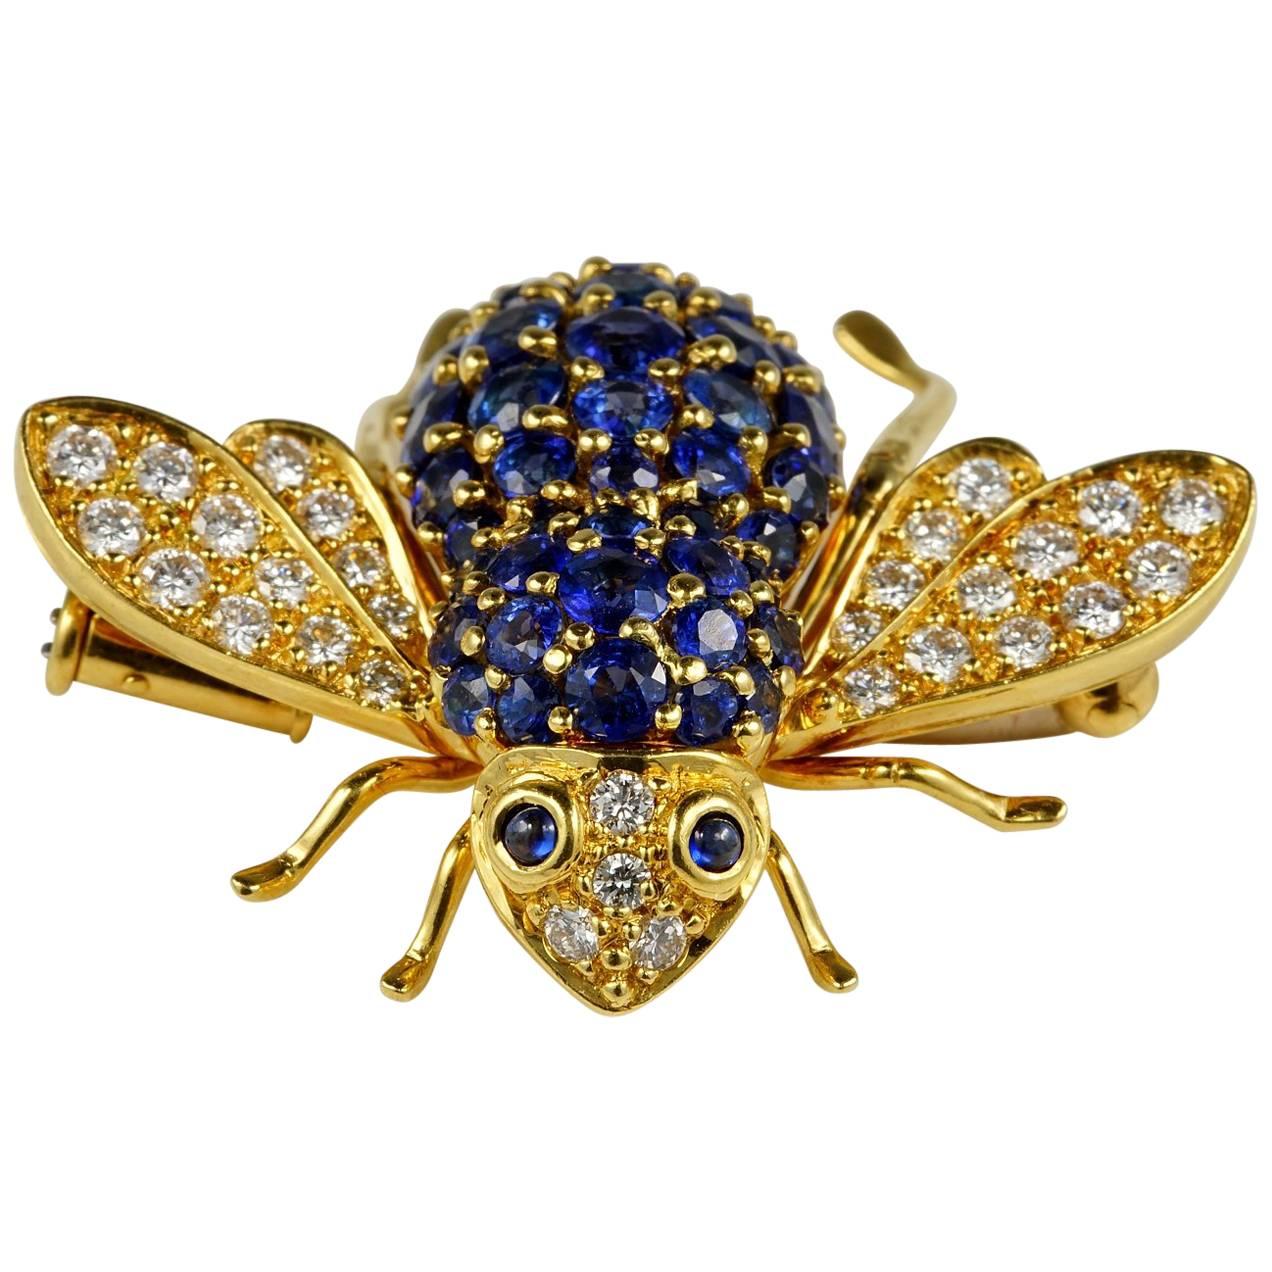 Vintage 3.0 Carat Untreated Sapphire .80 Carat Diamond Bumble Bee Brooch For Sale